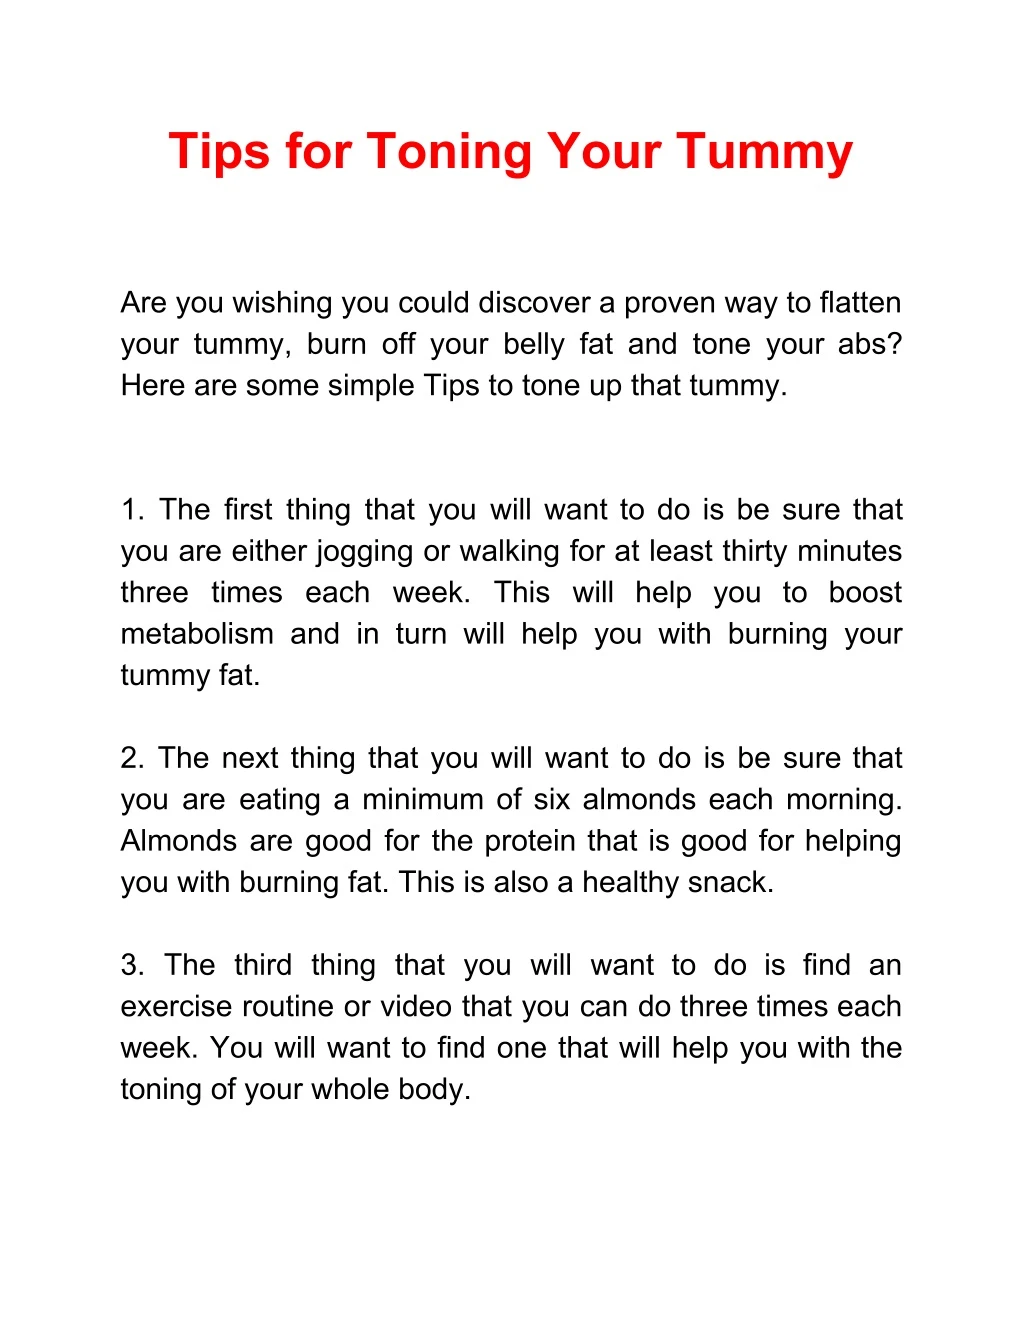 tips for toning your tummy